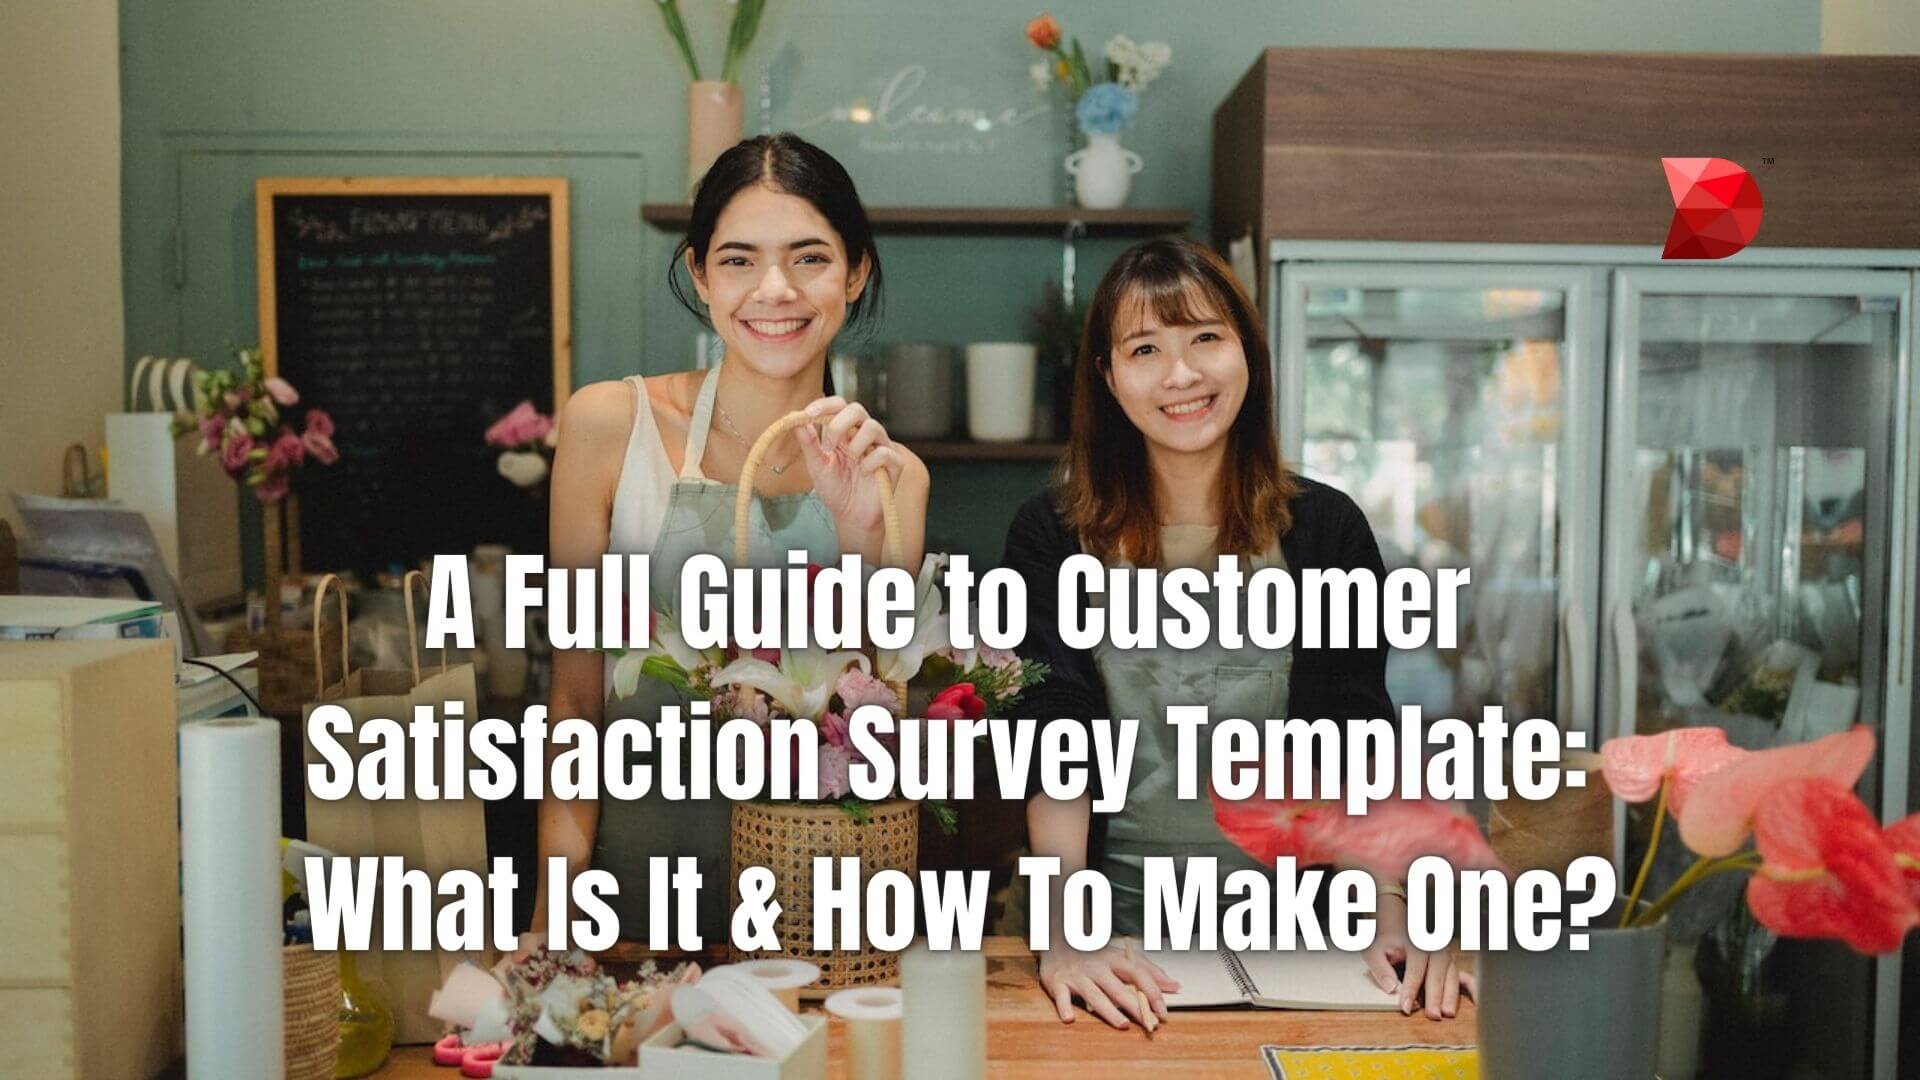 A Full Guide to Customer Satisfaction Survey Template What Is It & How To Make One